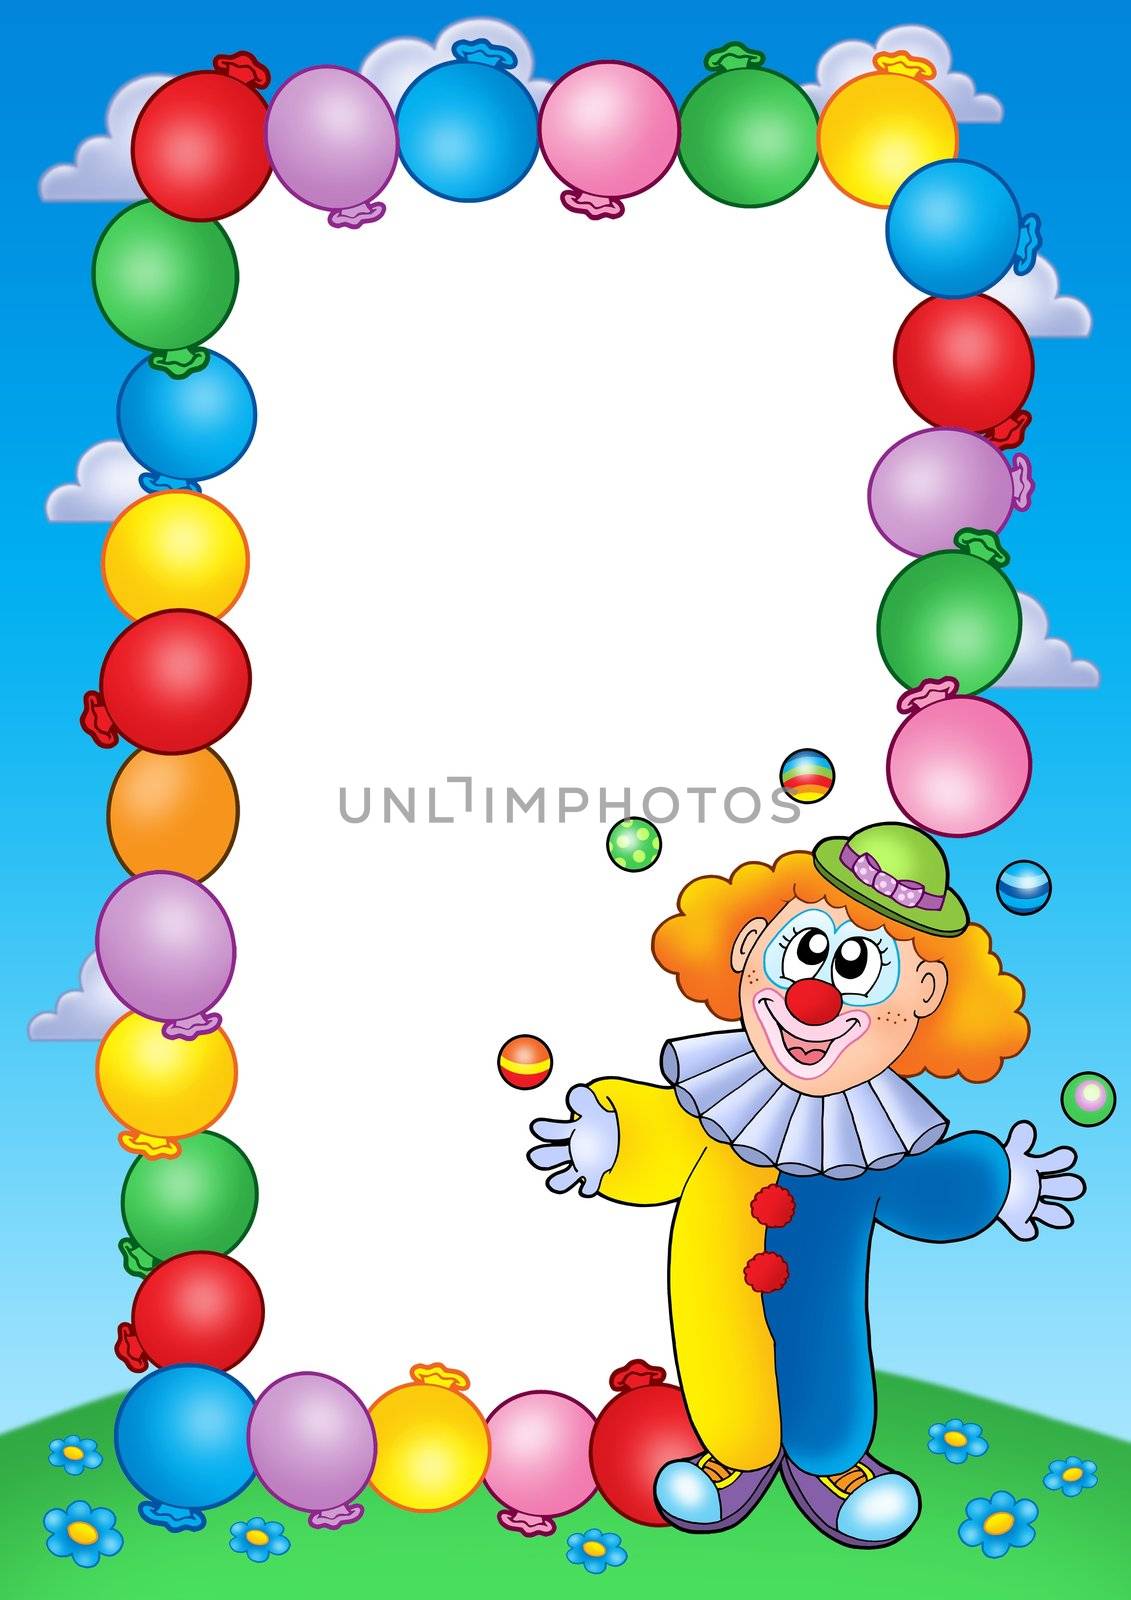 Party invitation frame with clown 4 by clairev